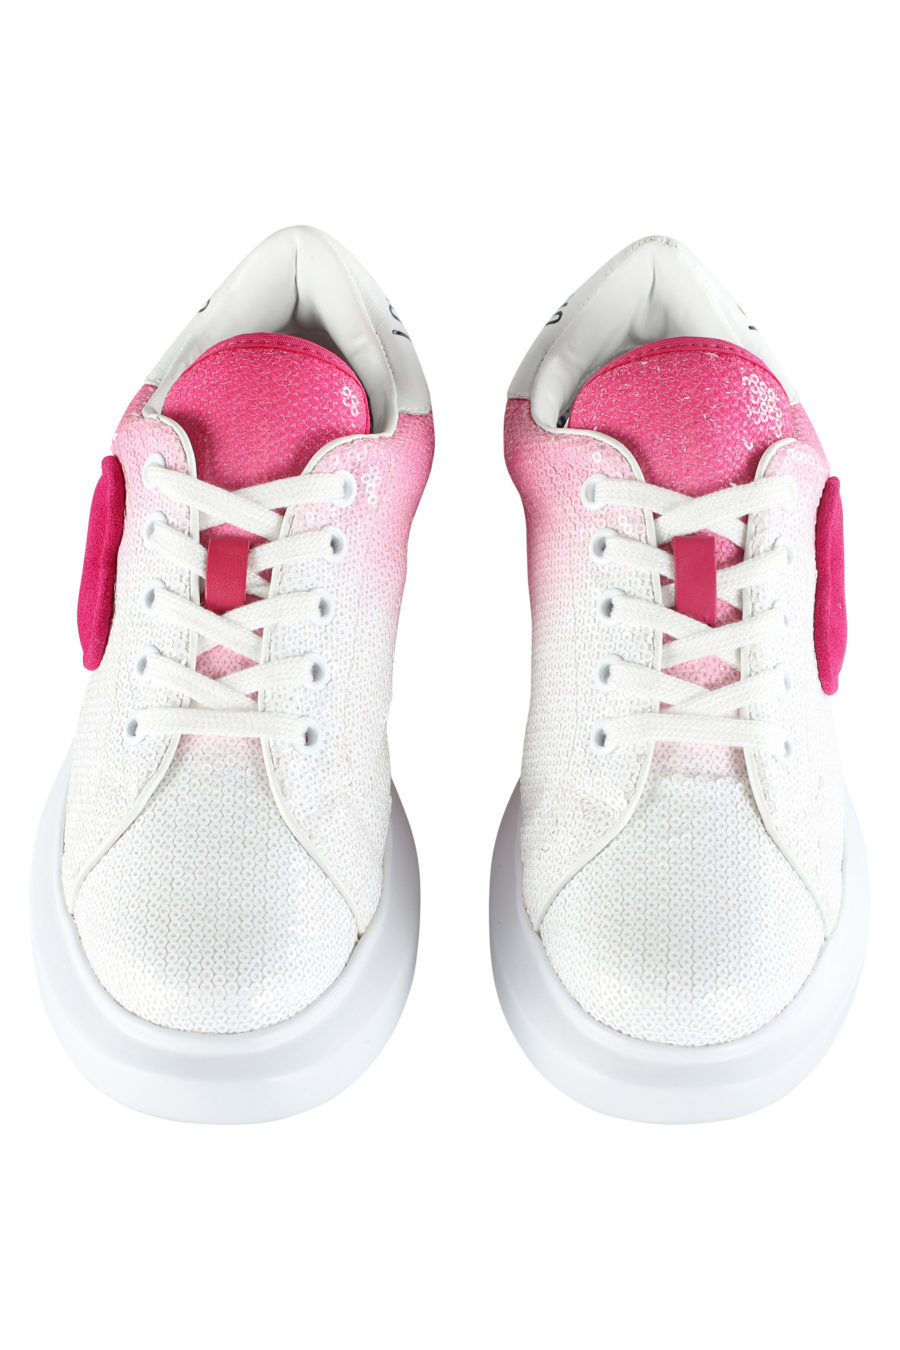 White trainers with pink gradient and sequins - IMG 5349